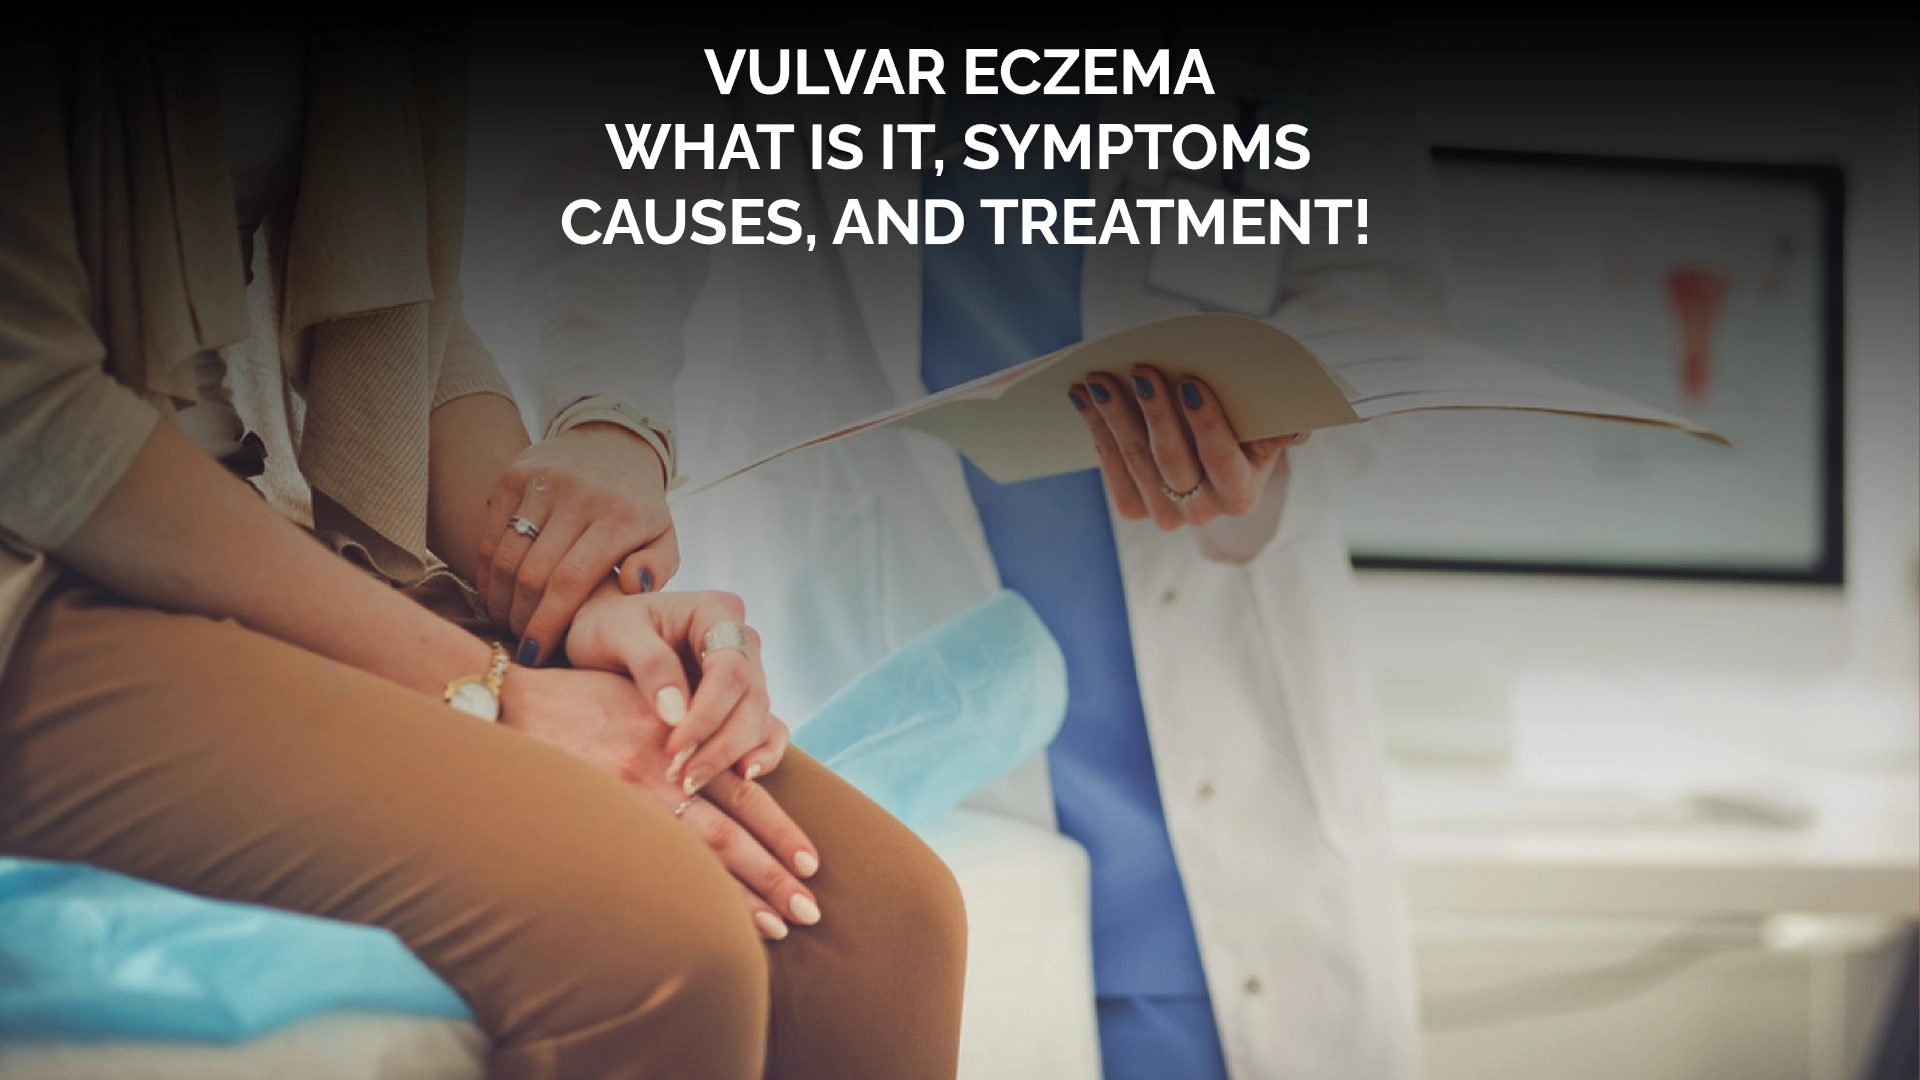 Vulvar Eczema What is it, Symptoms, Causes, and Treatment!